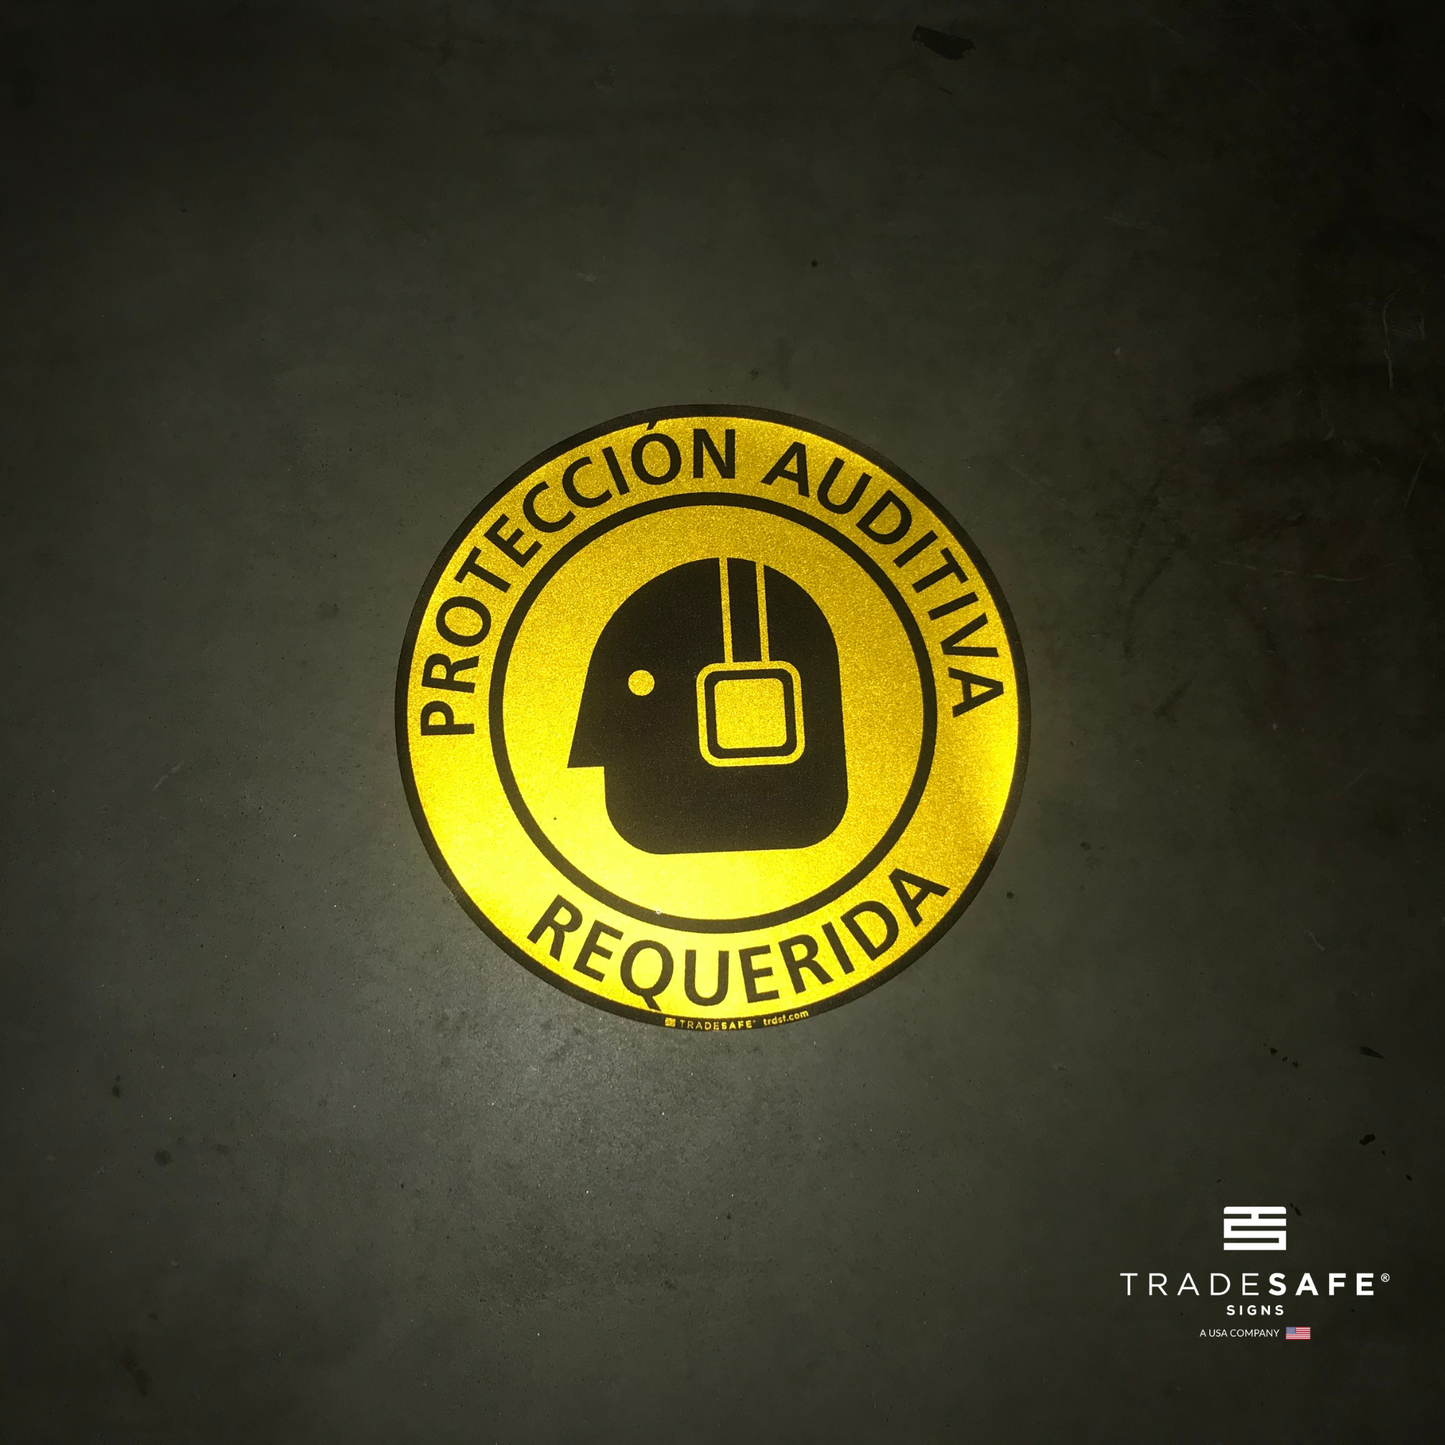 reflective attribute of adhesive vinyl "protección auditiva requerida" sign on black background